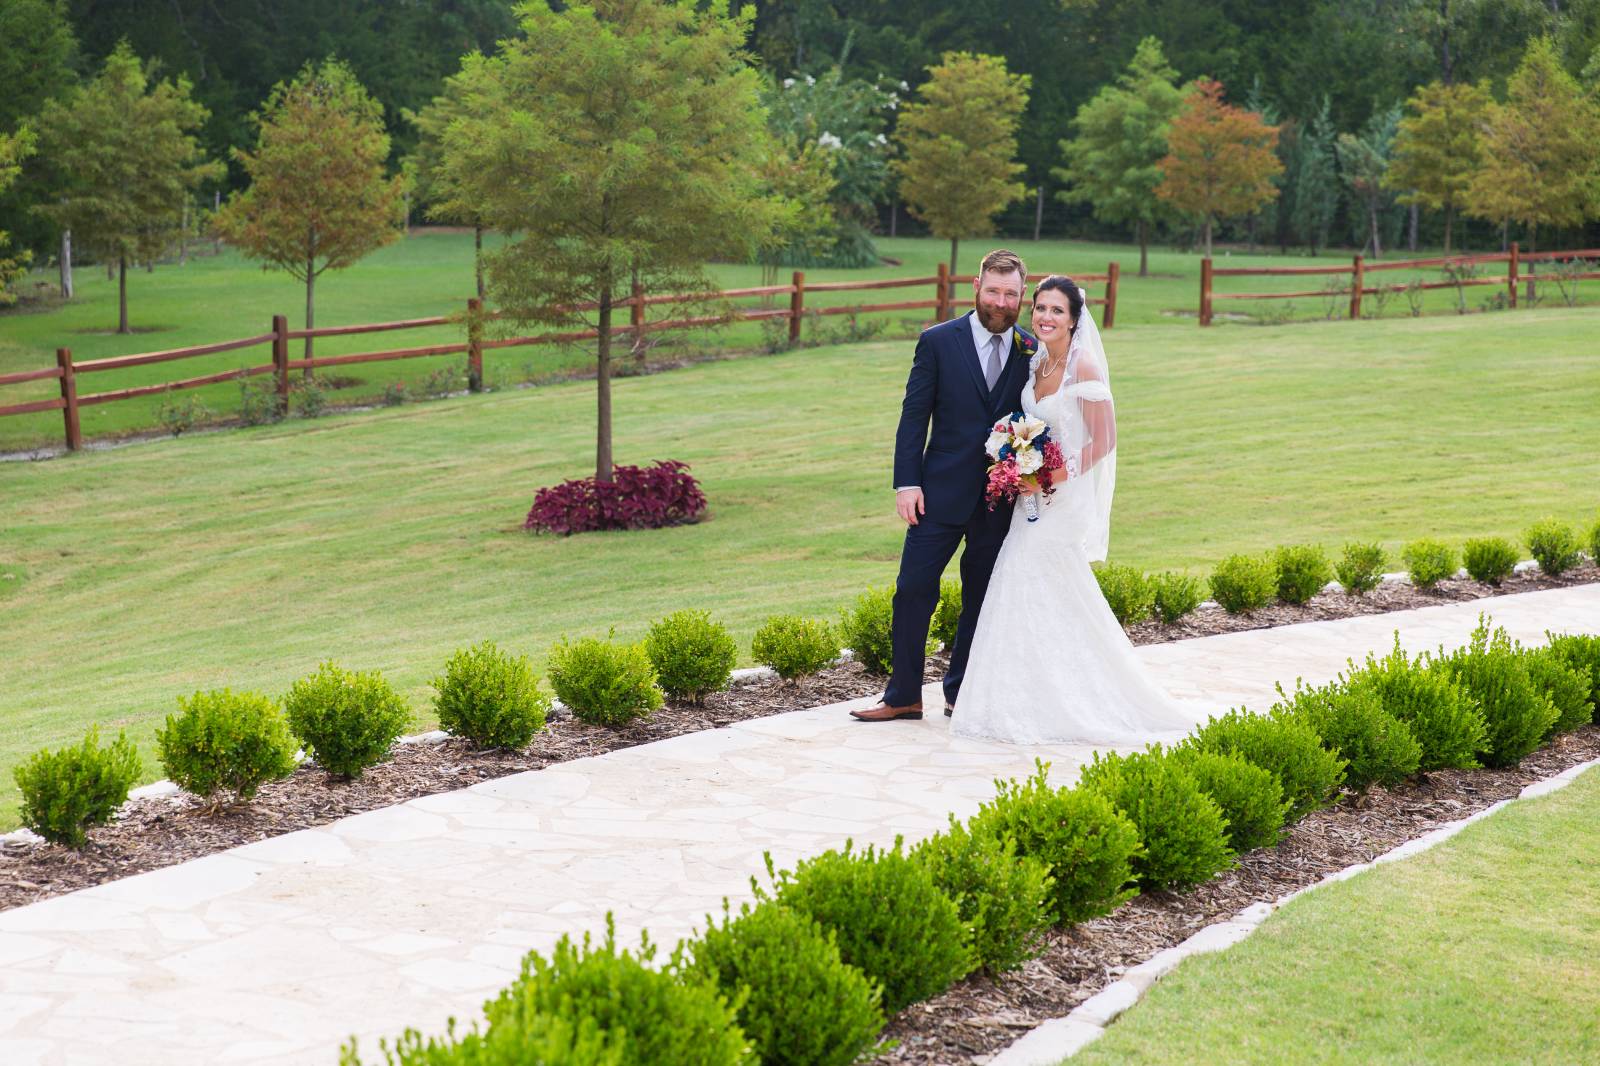 Bride and groom in lush green fields